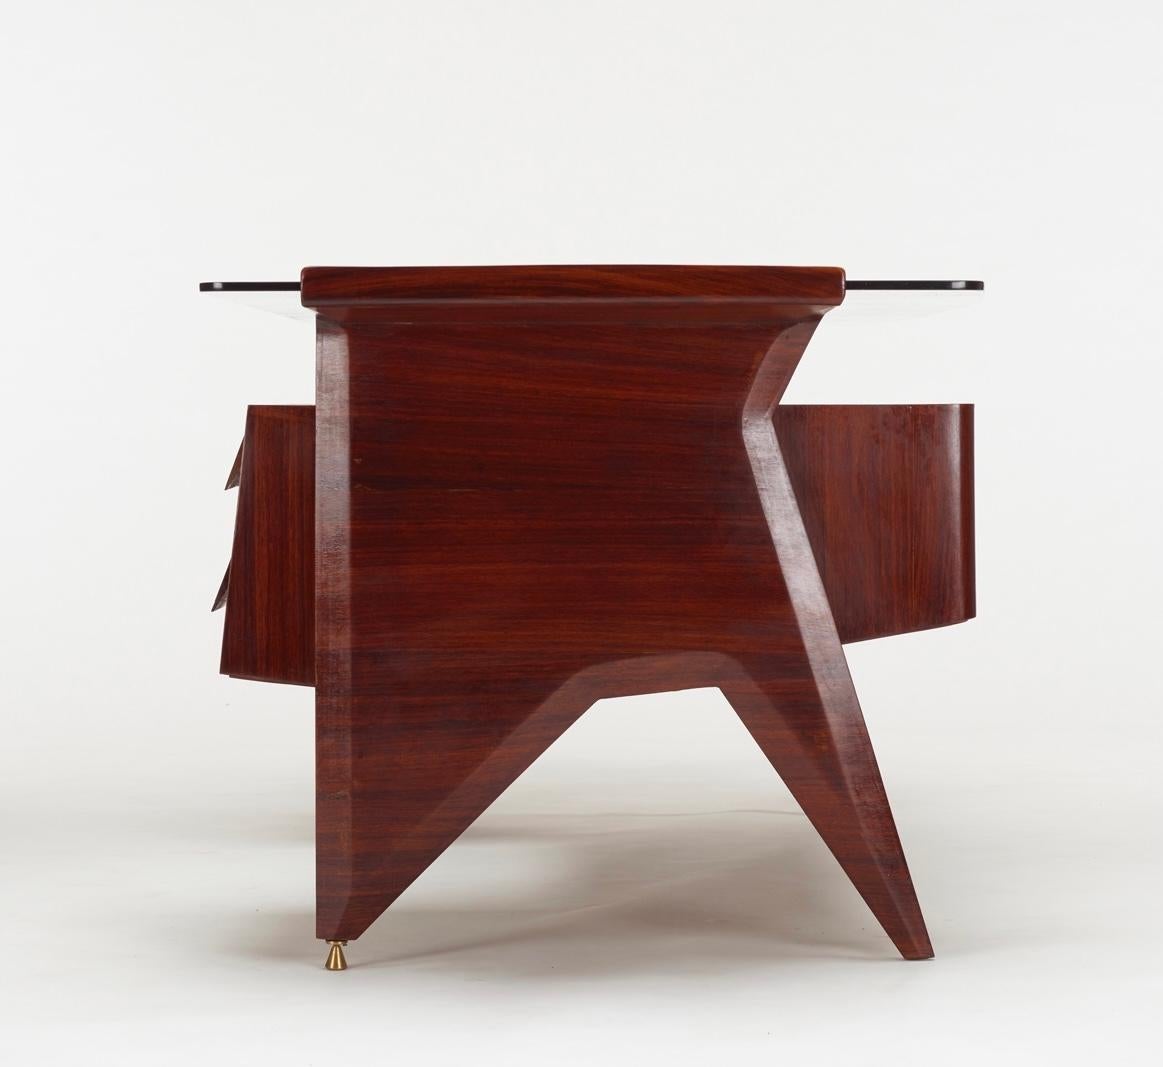 Modern Important Desk by Gio Ponti for the offices of Fontana Arte.